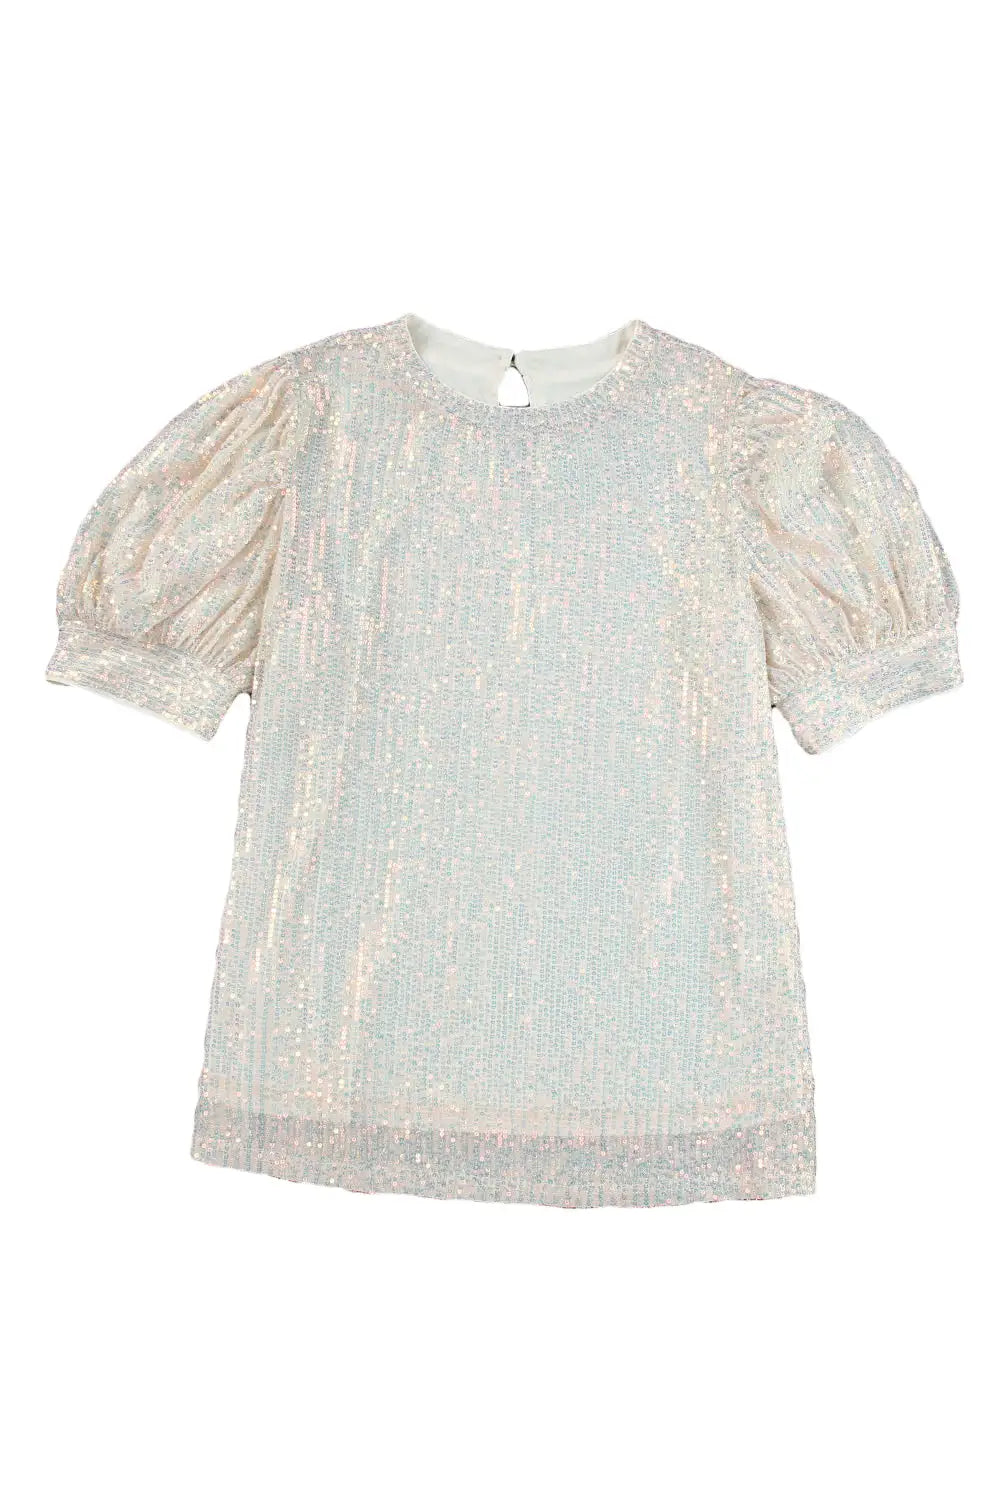 Apricot sequin puff sleeve top - tops